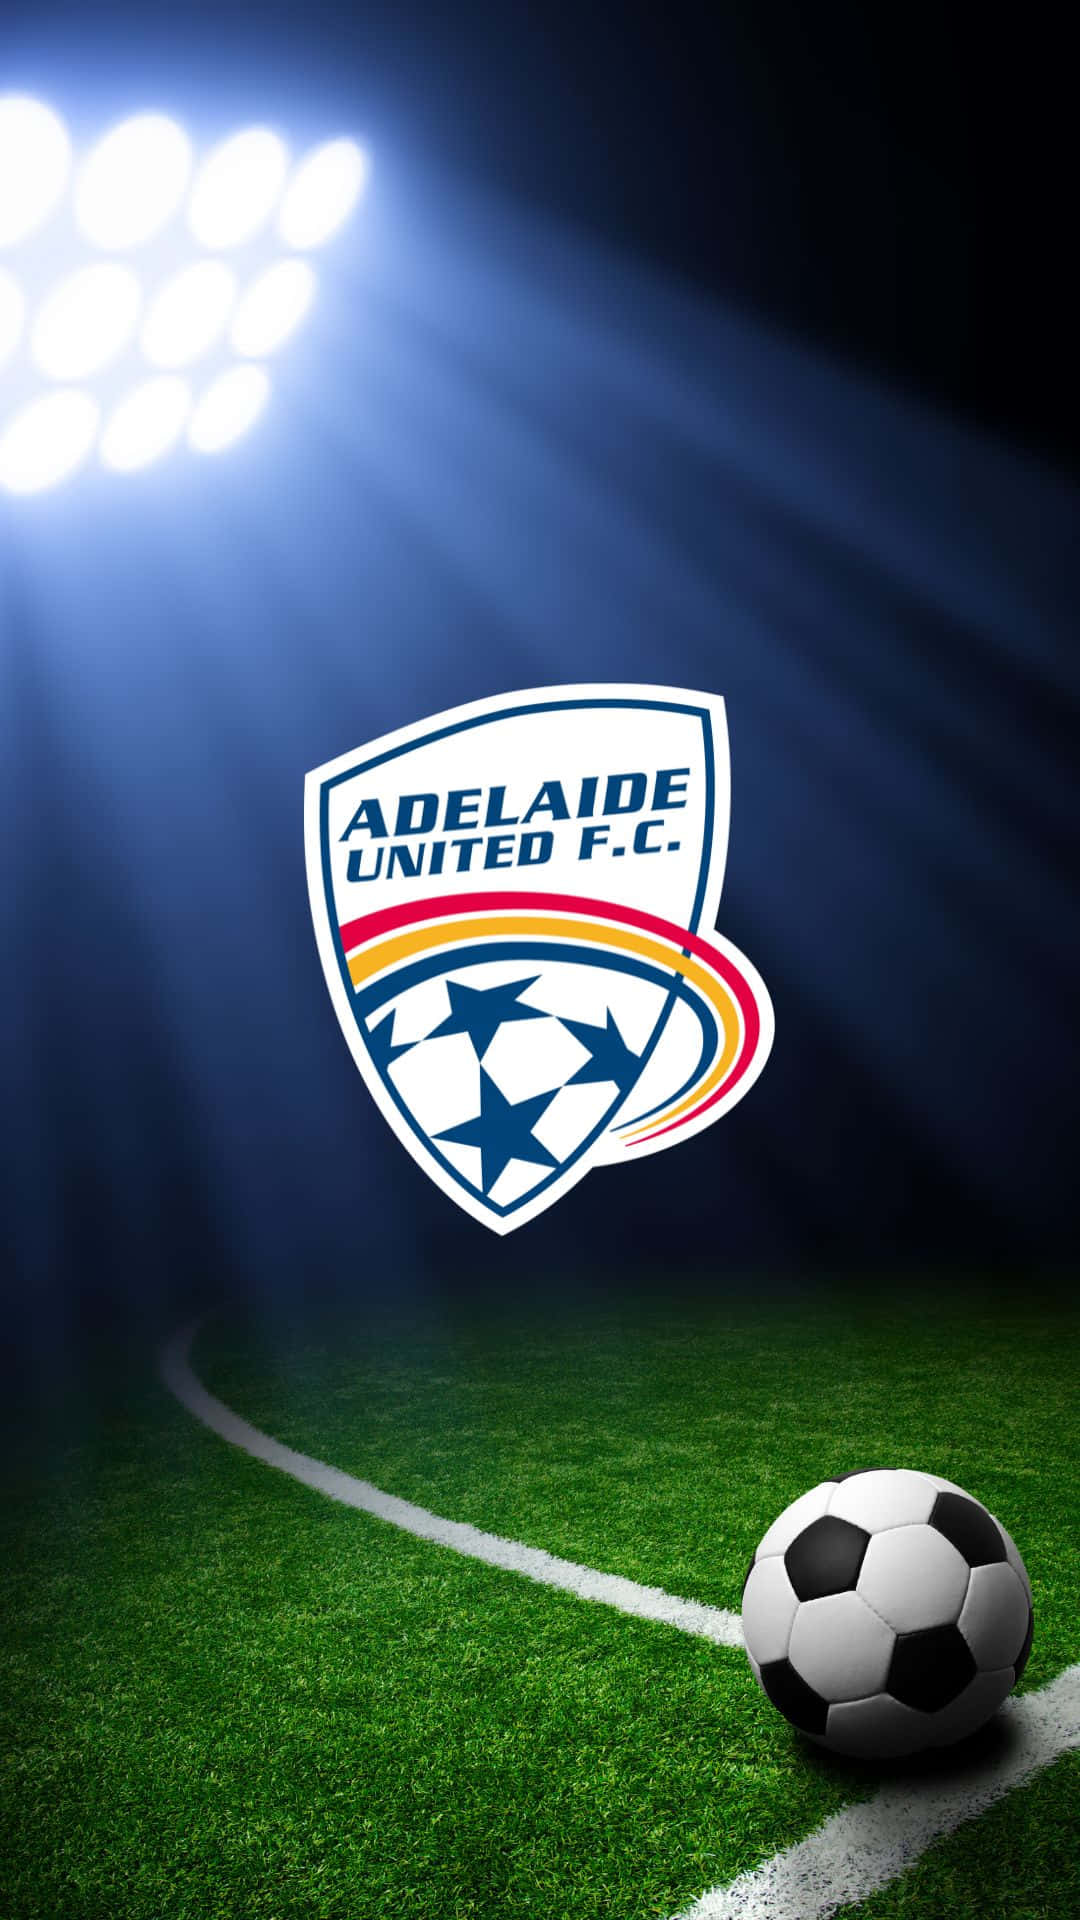 Adelaide United Players Celebrating On The Field Wallpaper